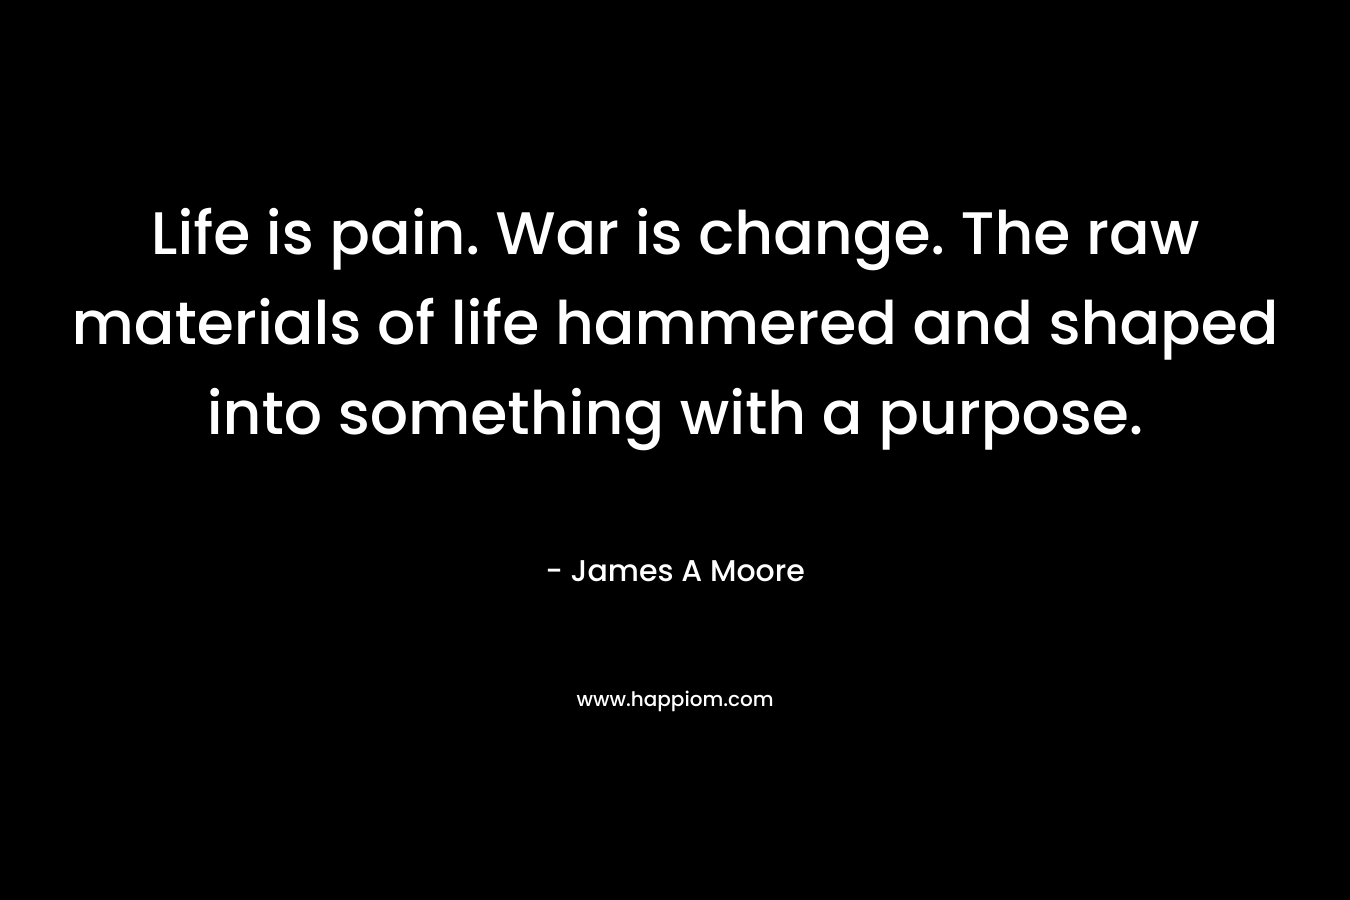 Life is pain. War is change. The raw materials of life hammered and shaped into something with a purpose.